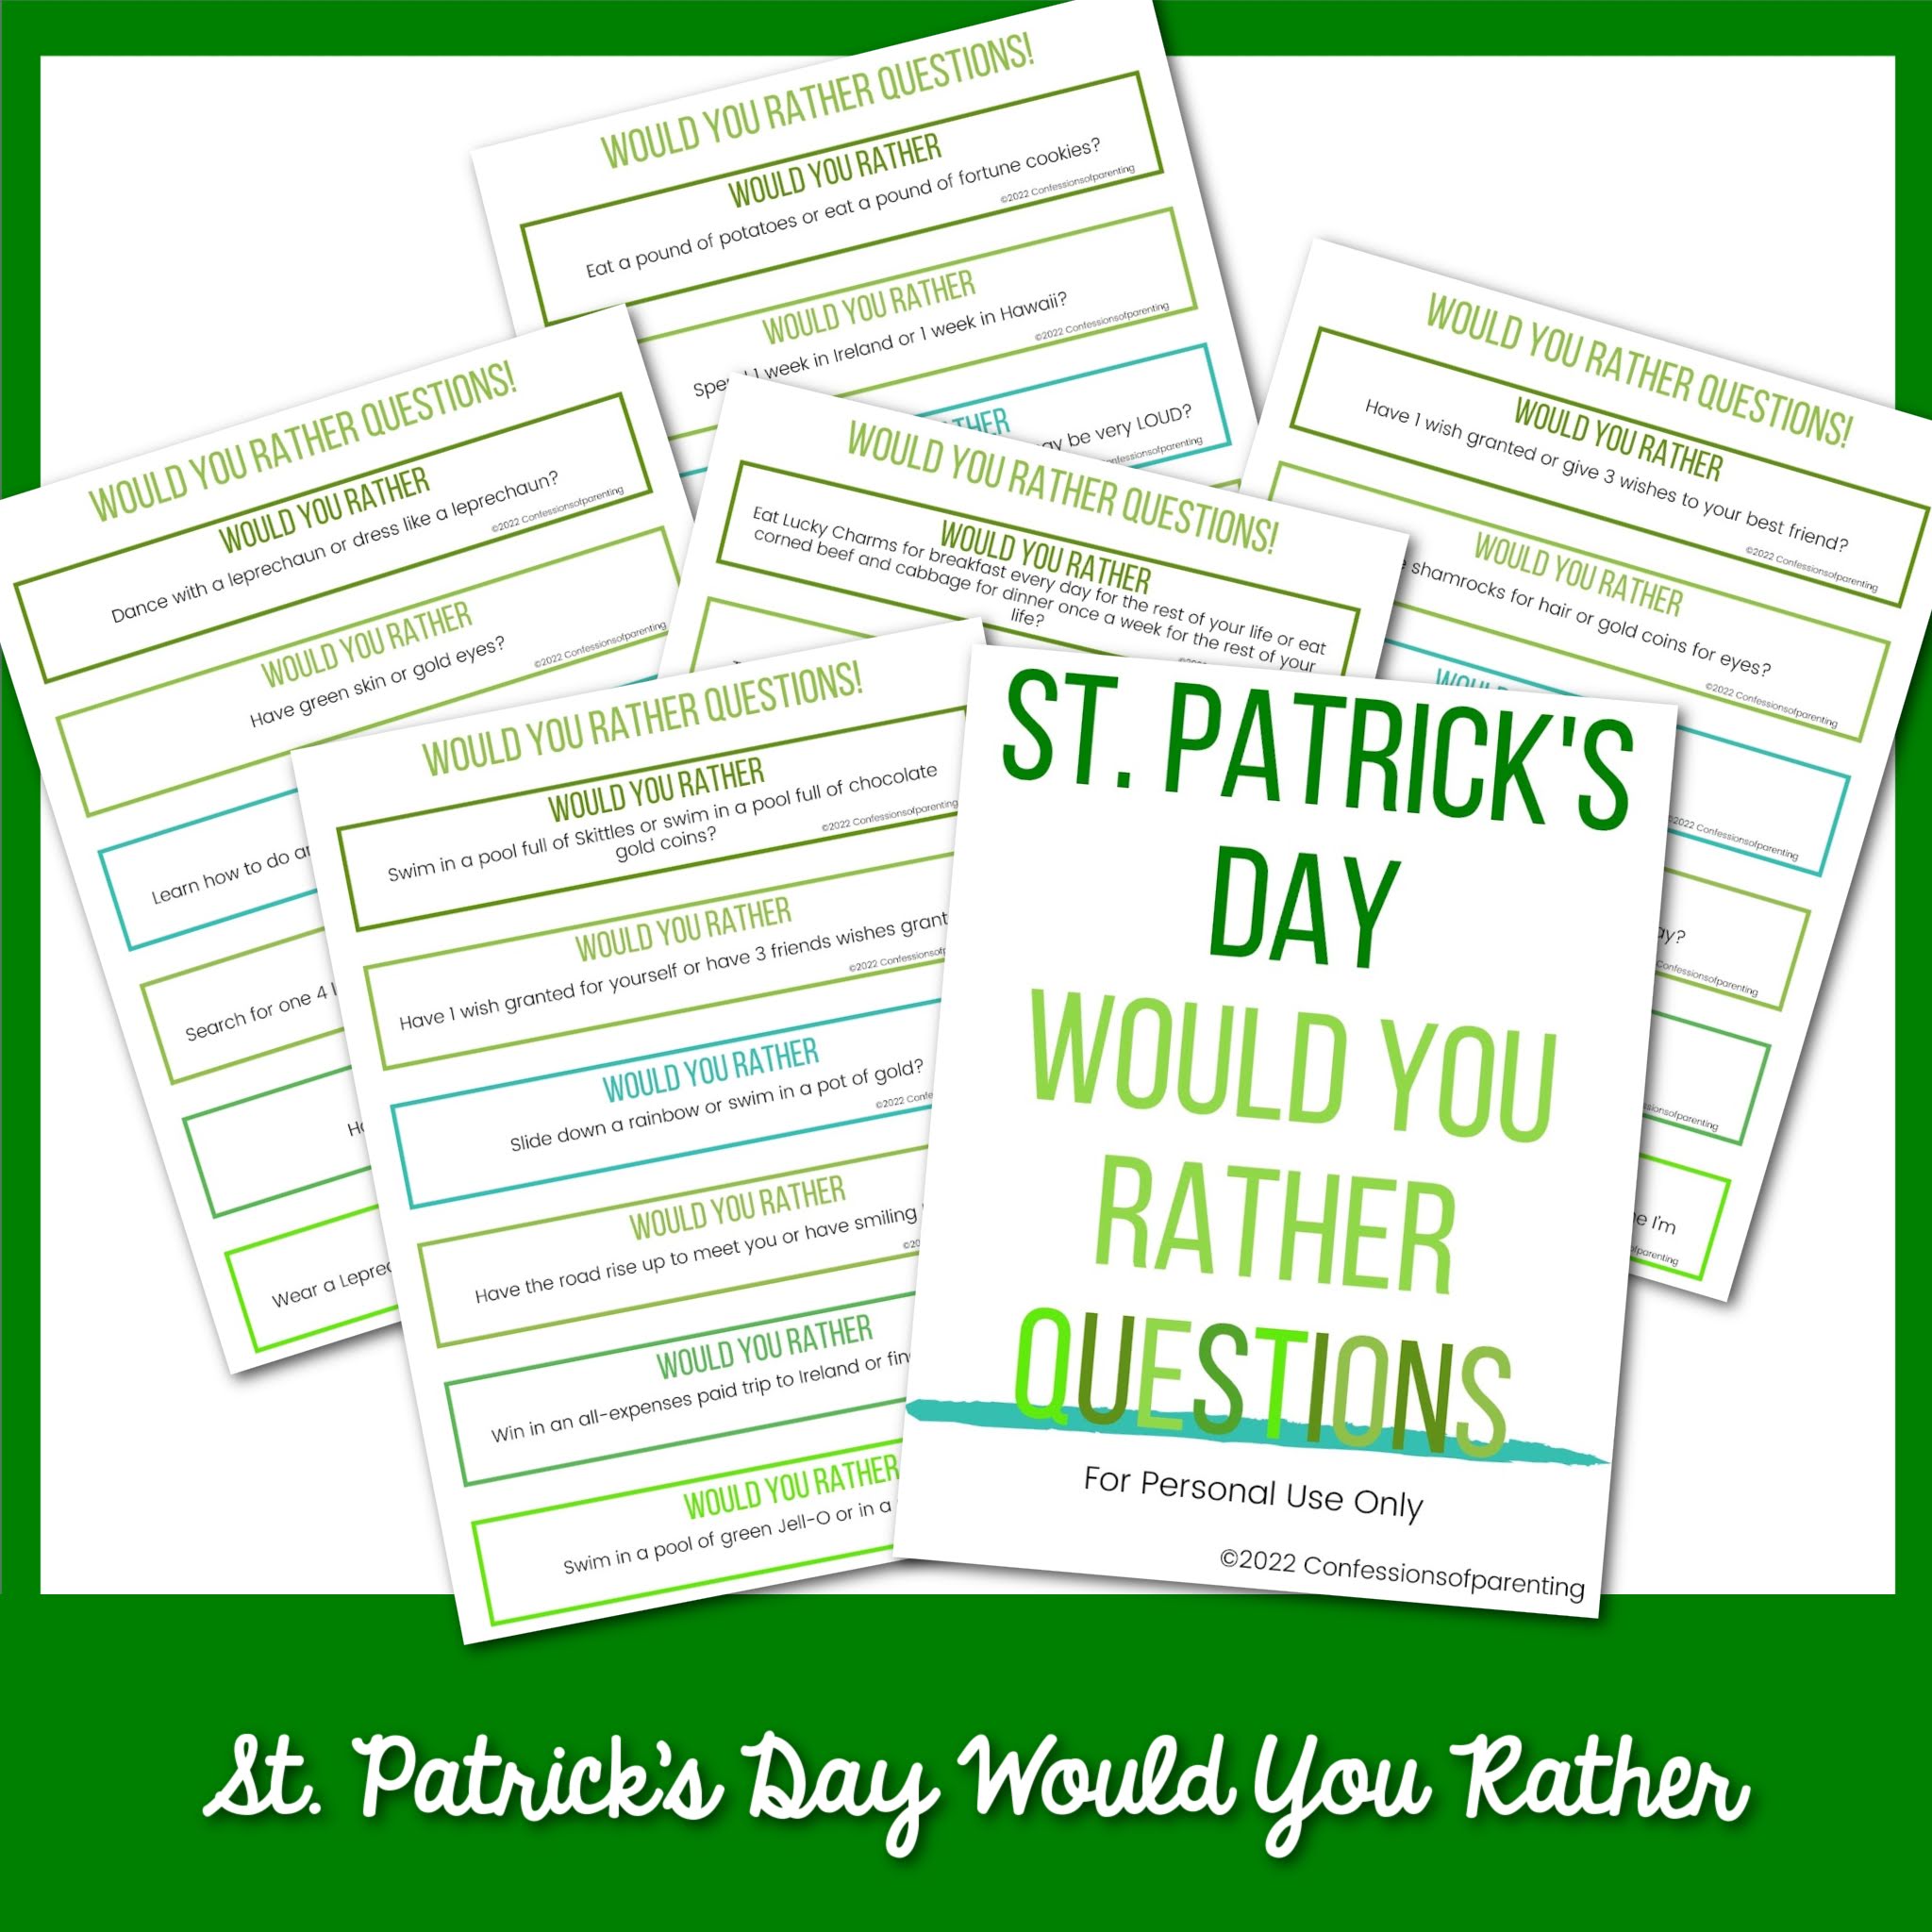 St. Patrick's Day Would You Rather